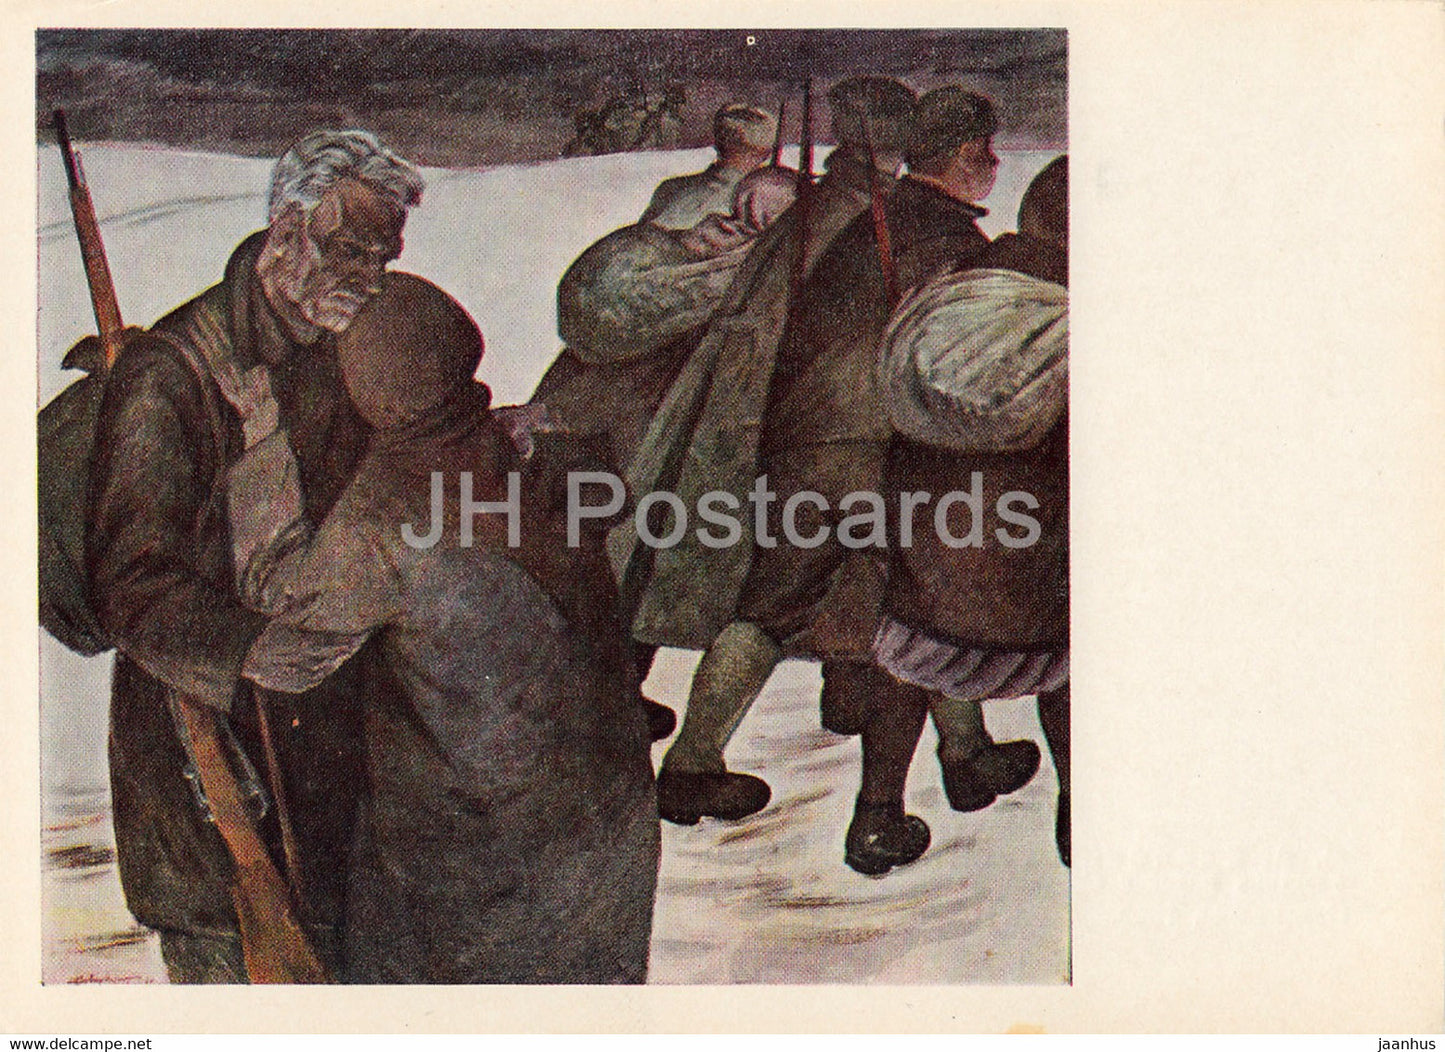 Guarding the World - painting by M. Savitsky - Partisans - military - art - 1965 - Russia USSR - unused - JH Postcards